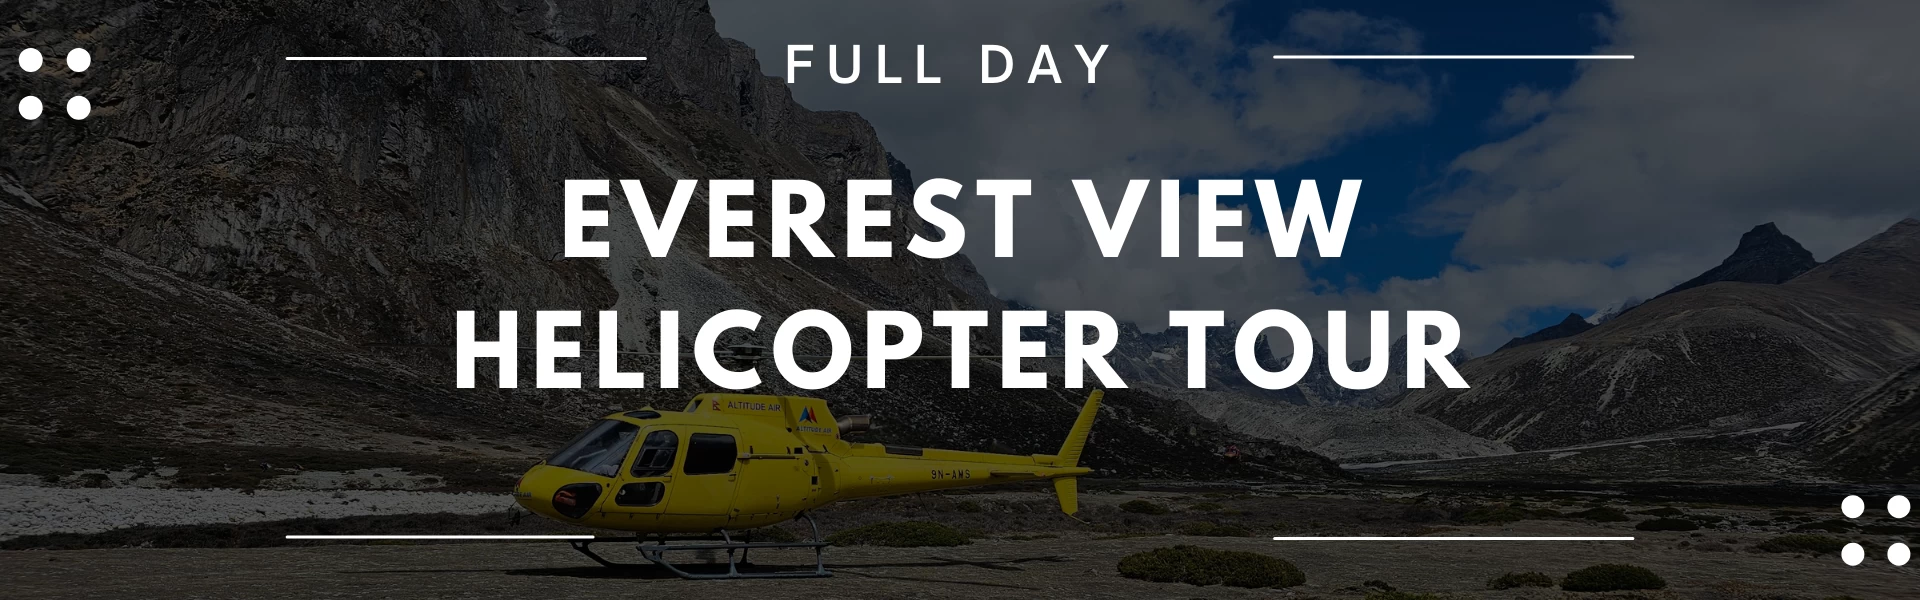 Full Day Everest View Helicopter Tour